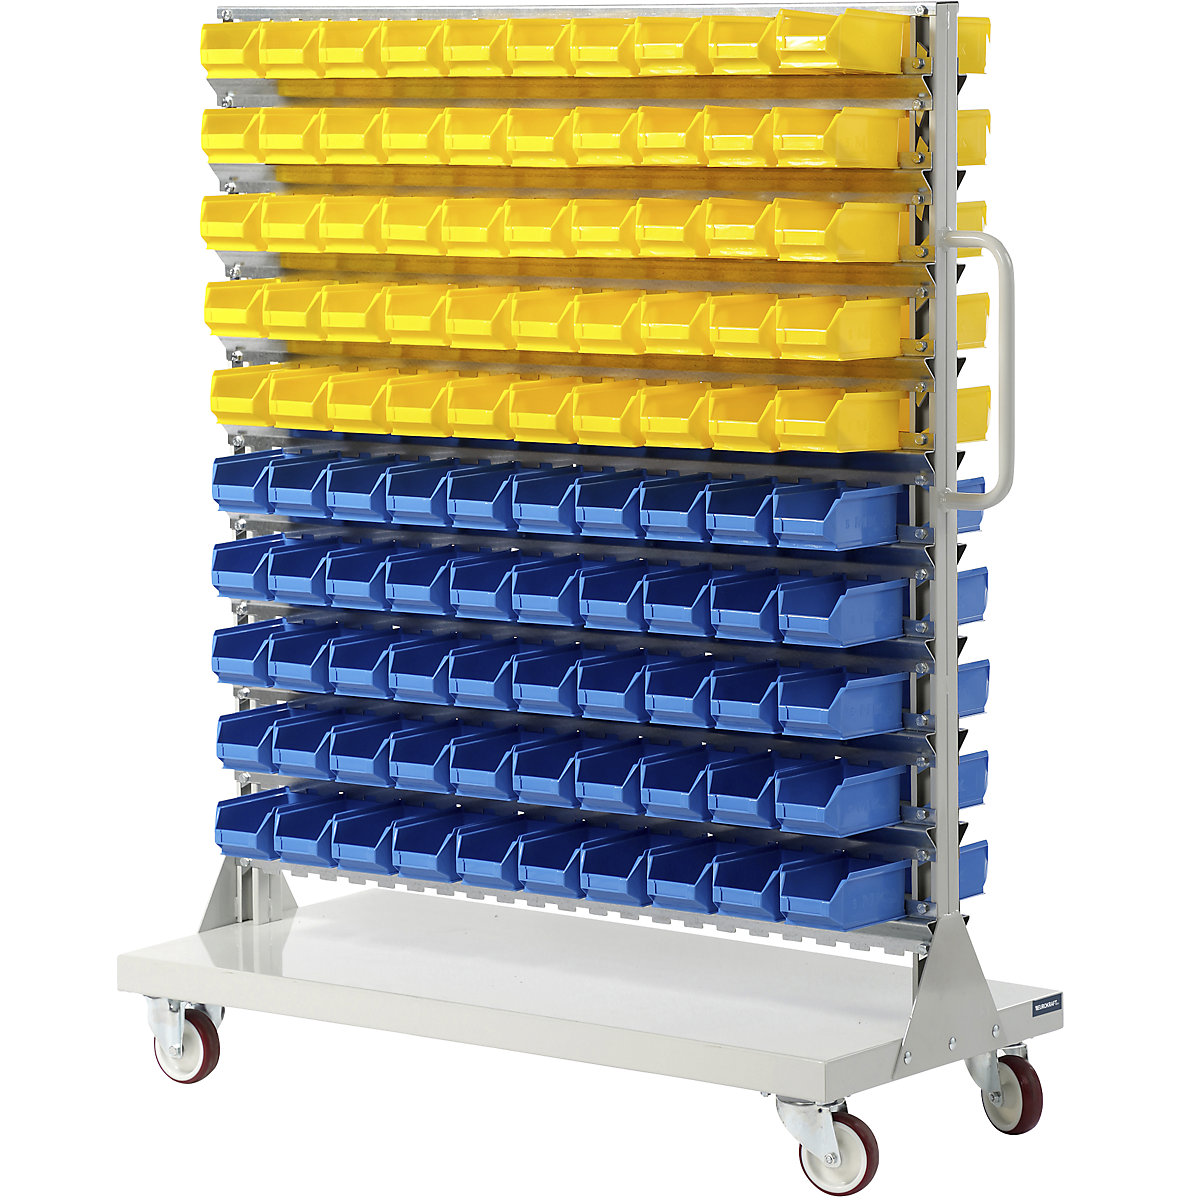 Mobile rack with open fronted storage bins - eurokraft pro